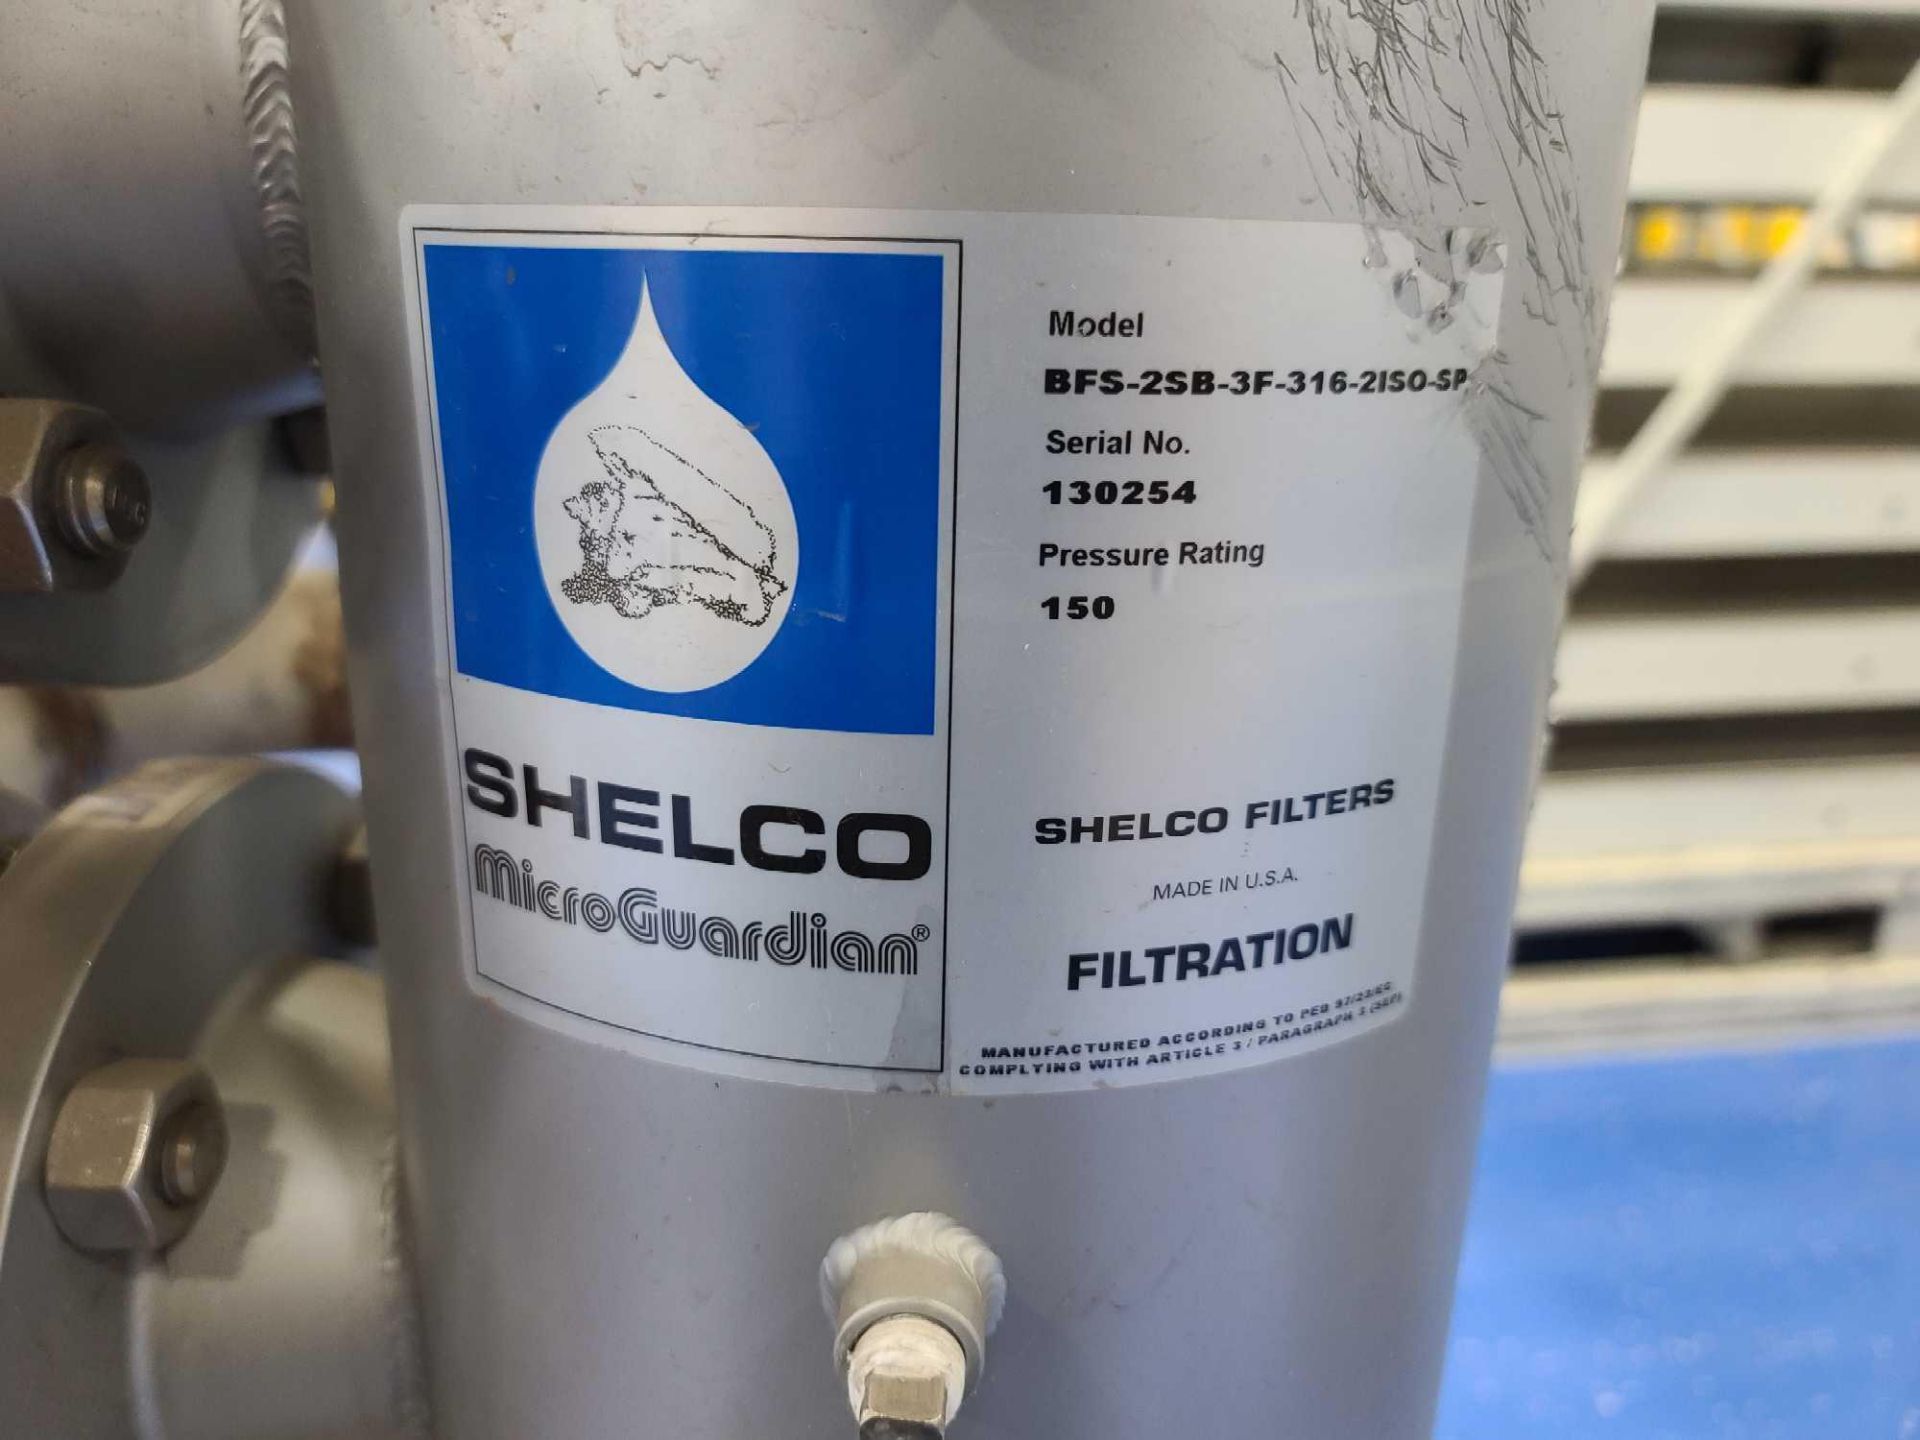 (2) Shelco MicroGuardian Water Filters - Image 7 of 9